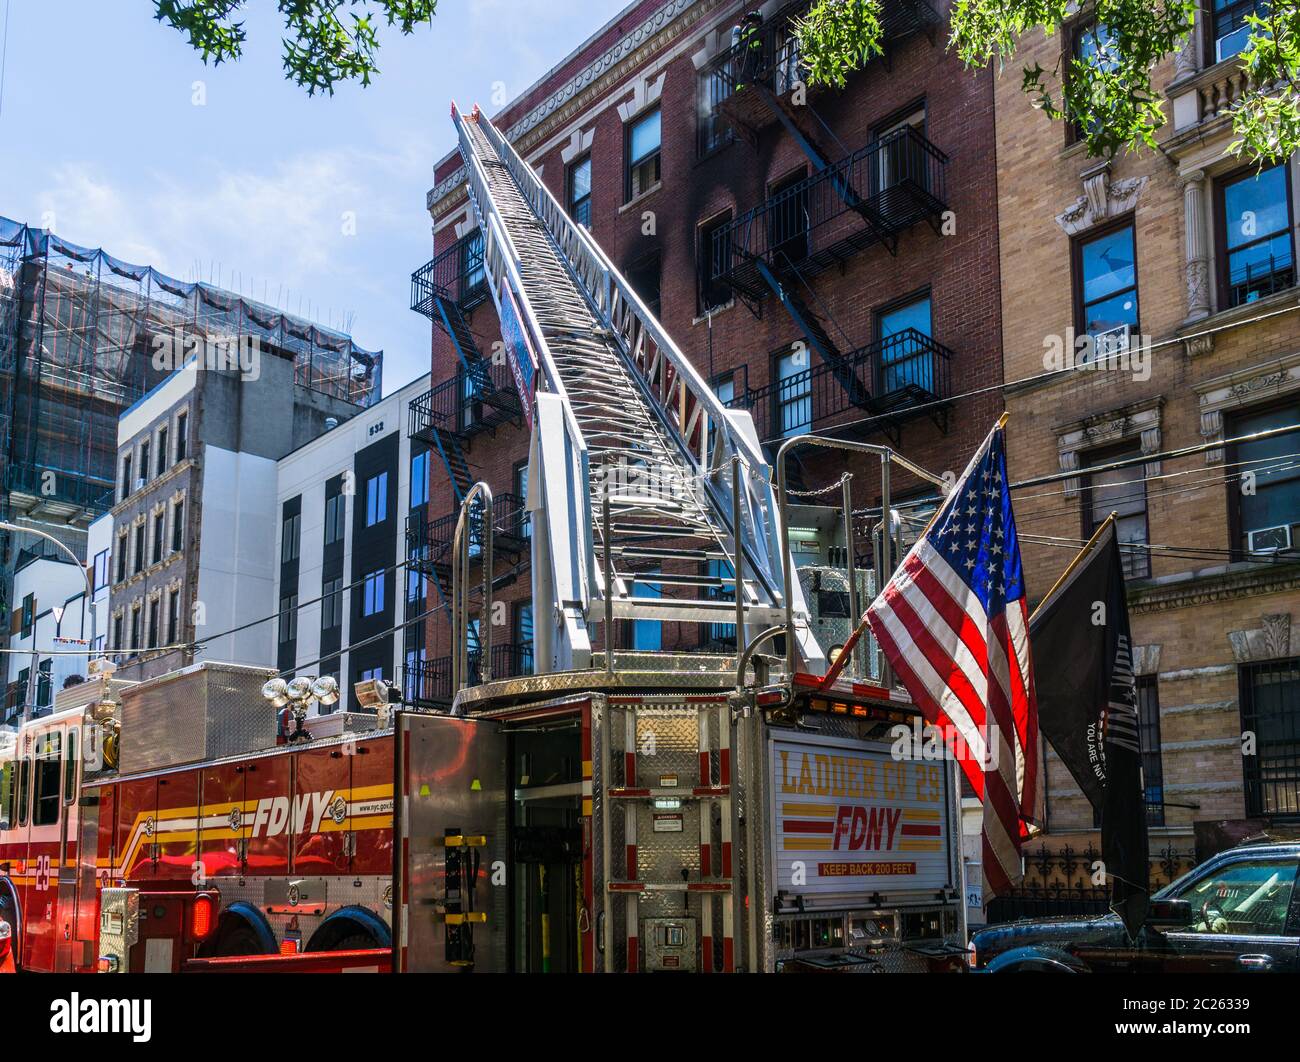 Fdny Engine 5 High Resolution Stock Photography and Images - Alamy